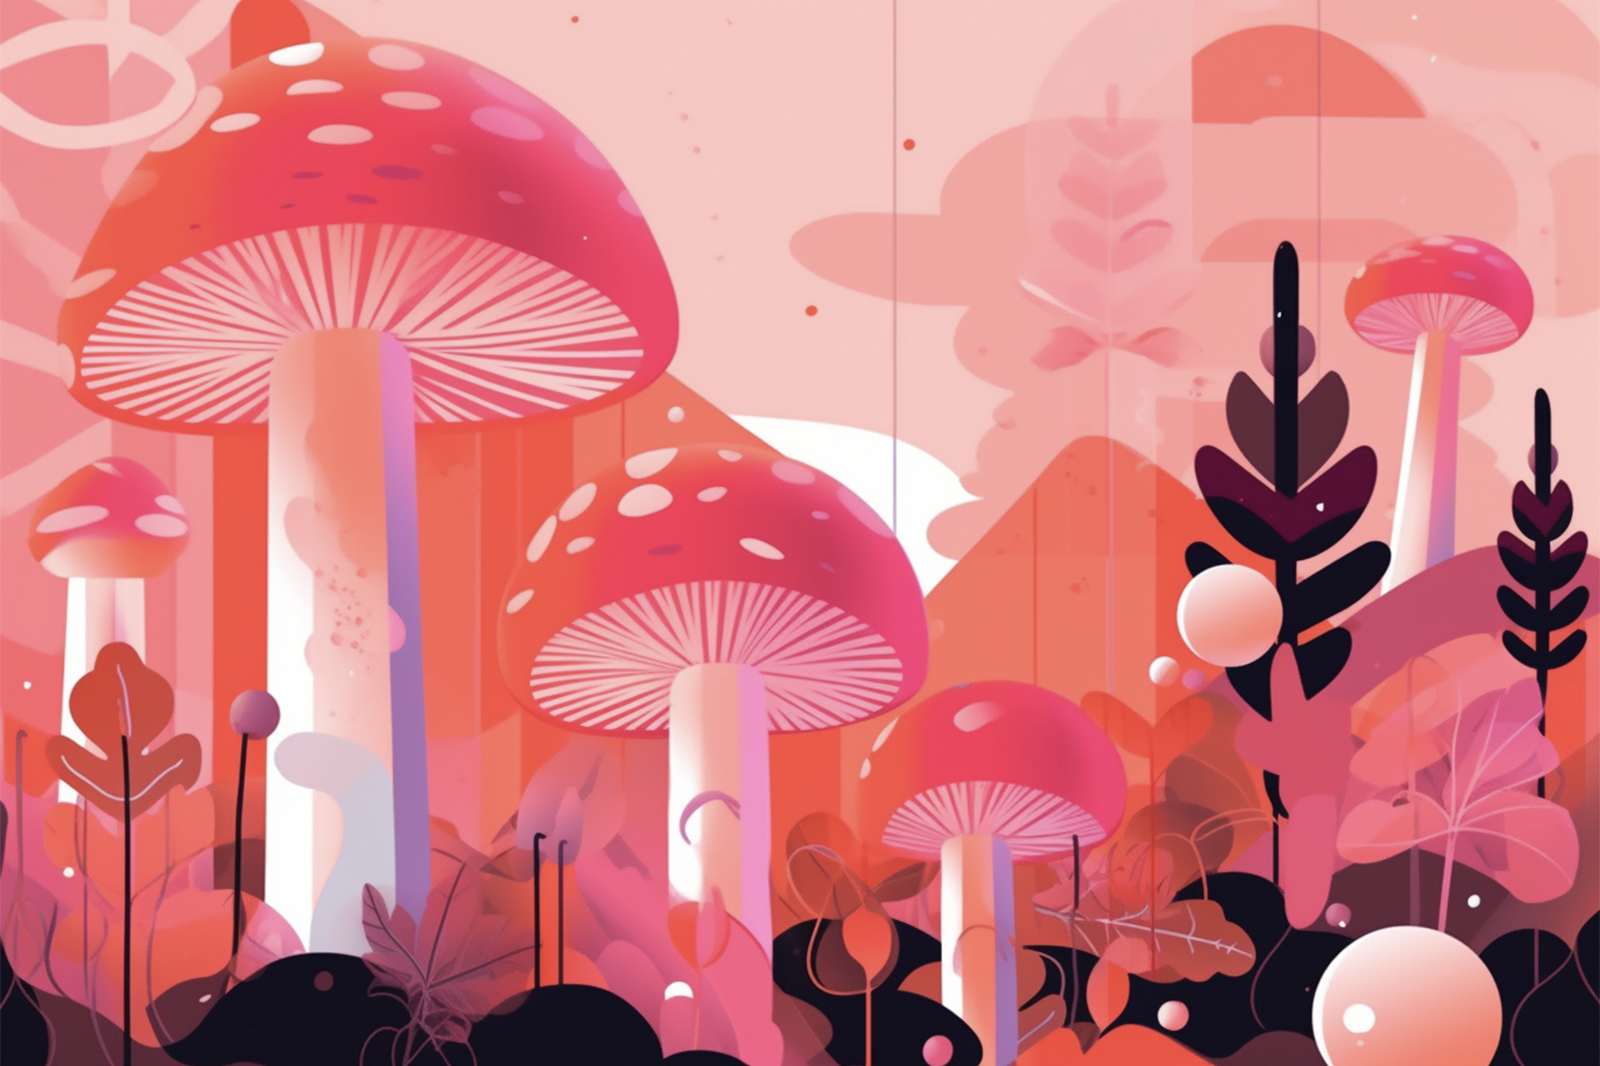 Enchanting pink mushroom amidst majestic mountains, with a vibrant tree and a delicate leaf